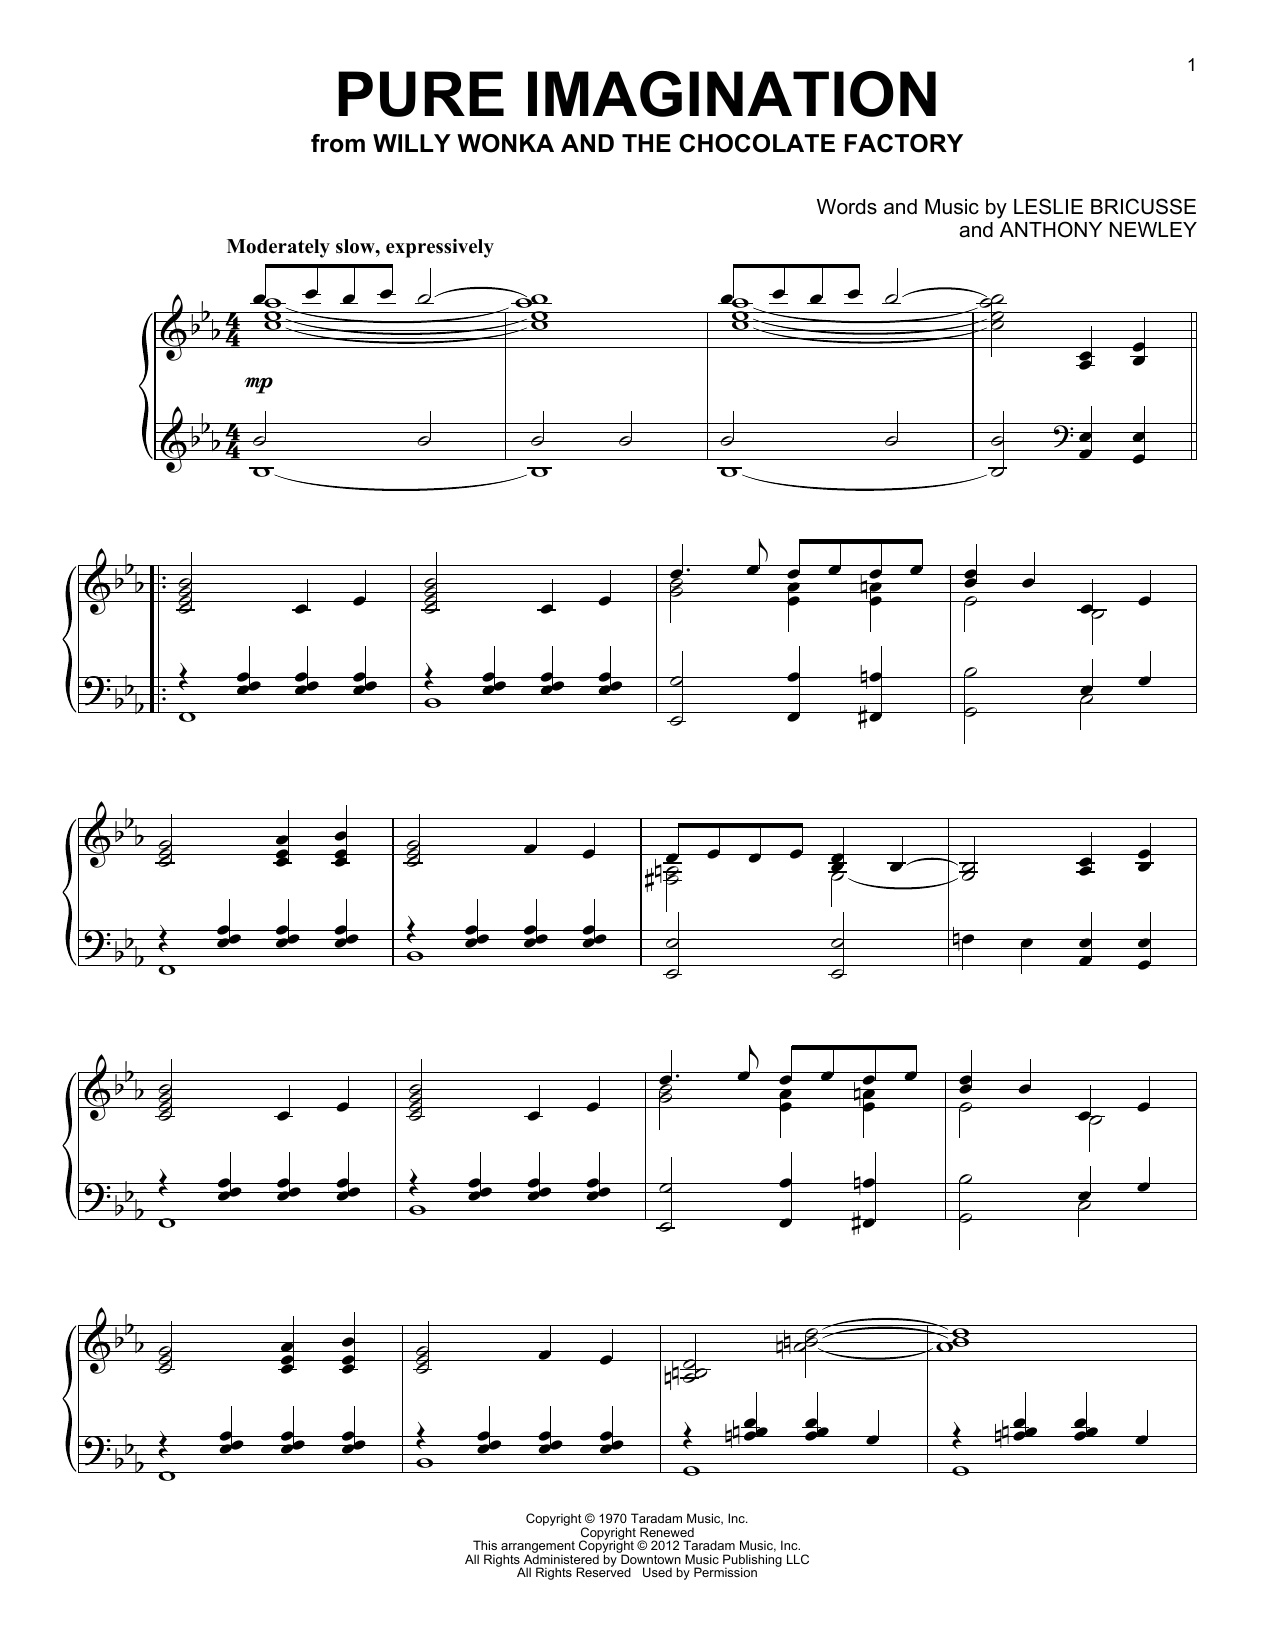 Download Willy Wonka & the Chocolate Factory Pure Imagination Sheet Music